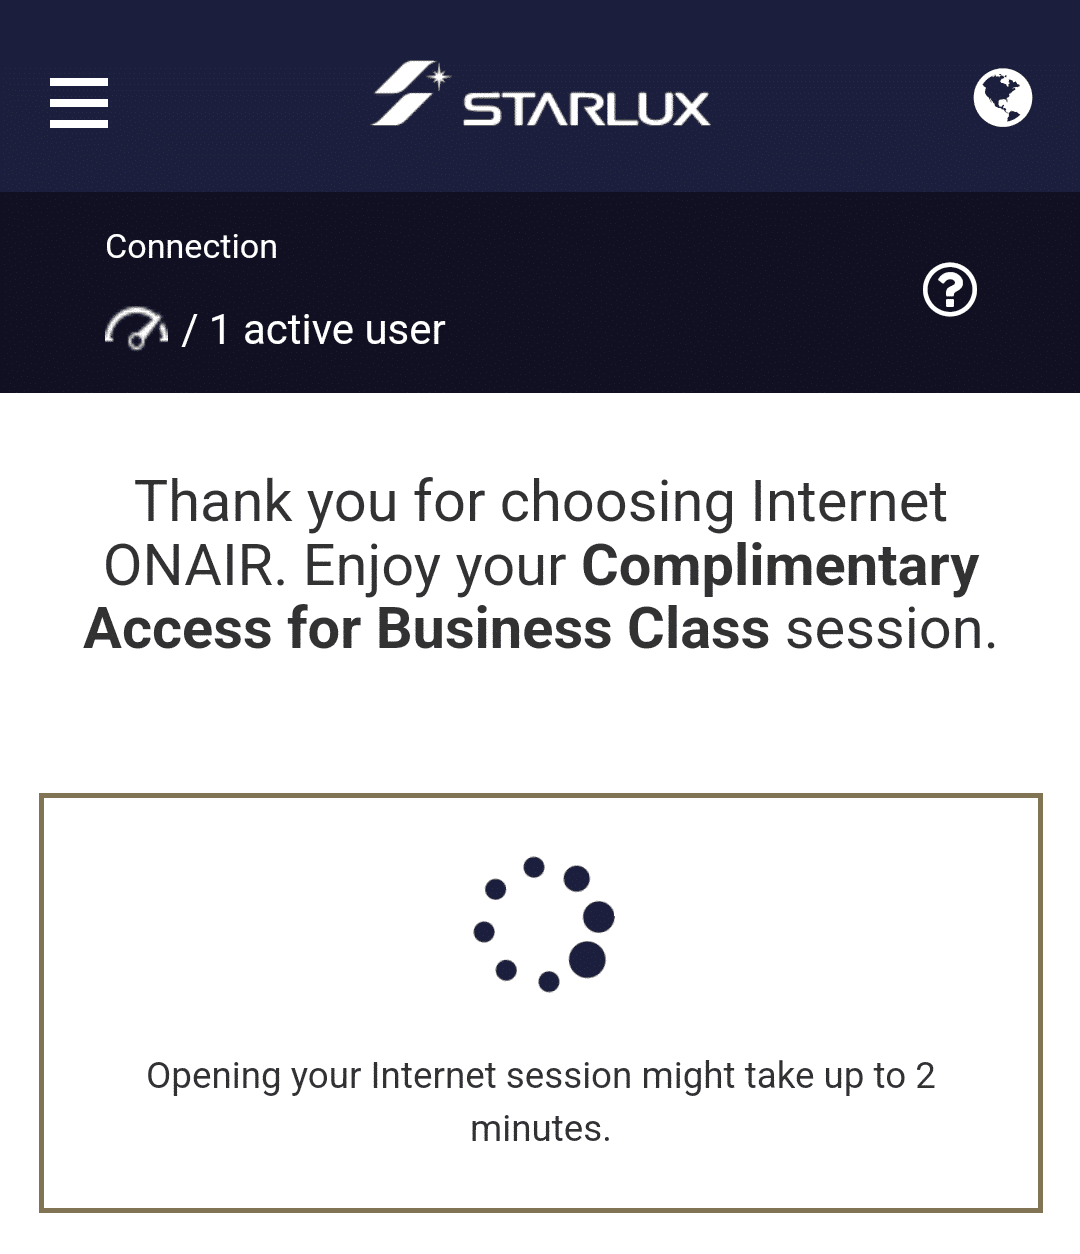 starlux business class a321neo complimentary inflight wifi sign in